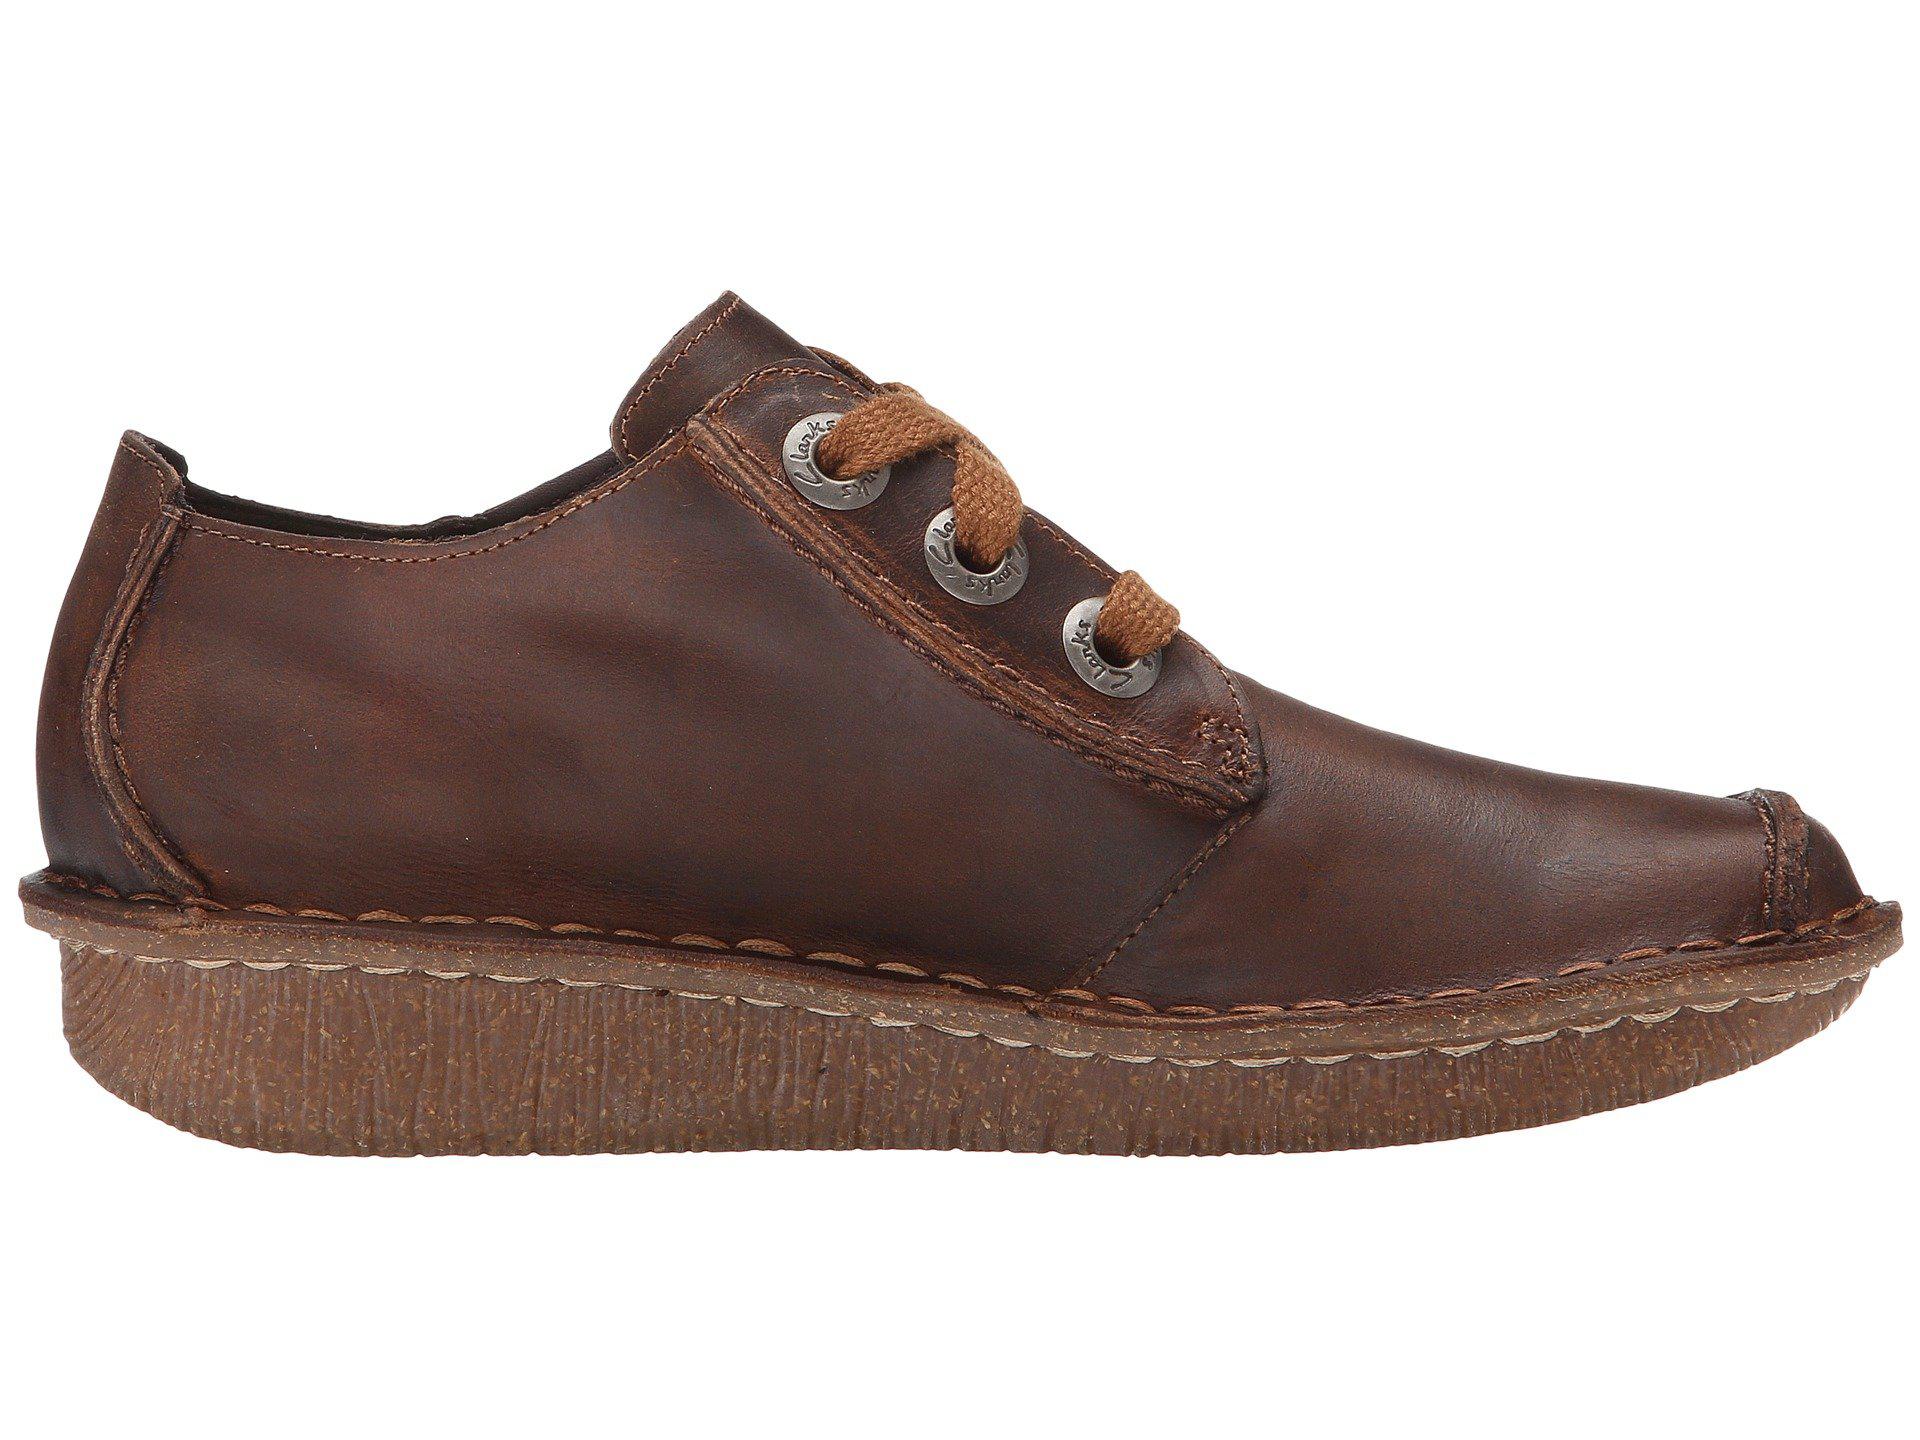 Clarks Funny Dream Brown Clearance, SAVE 57%.